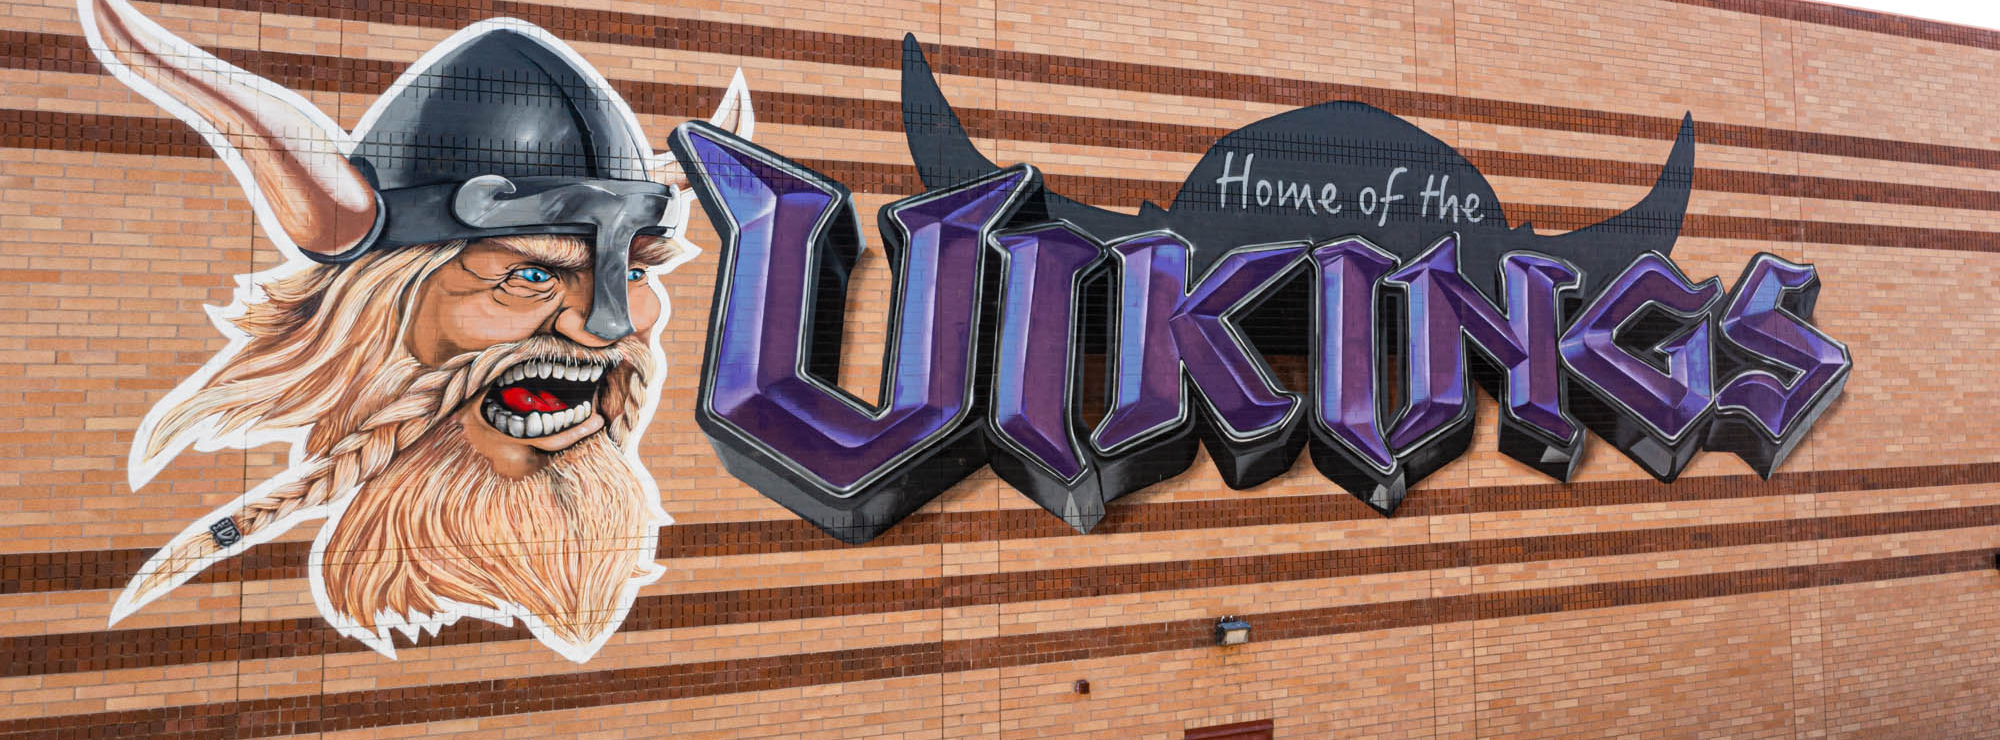 Home of the Vikings Mural on the wall of the Johansen Gym